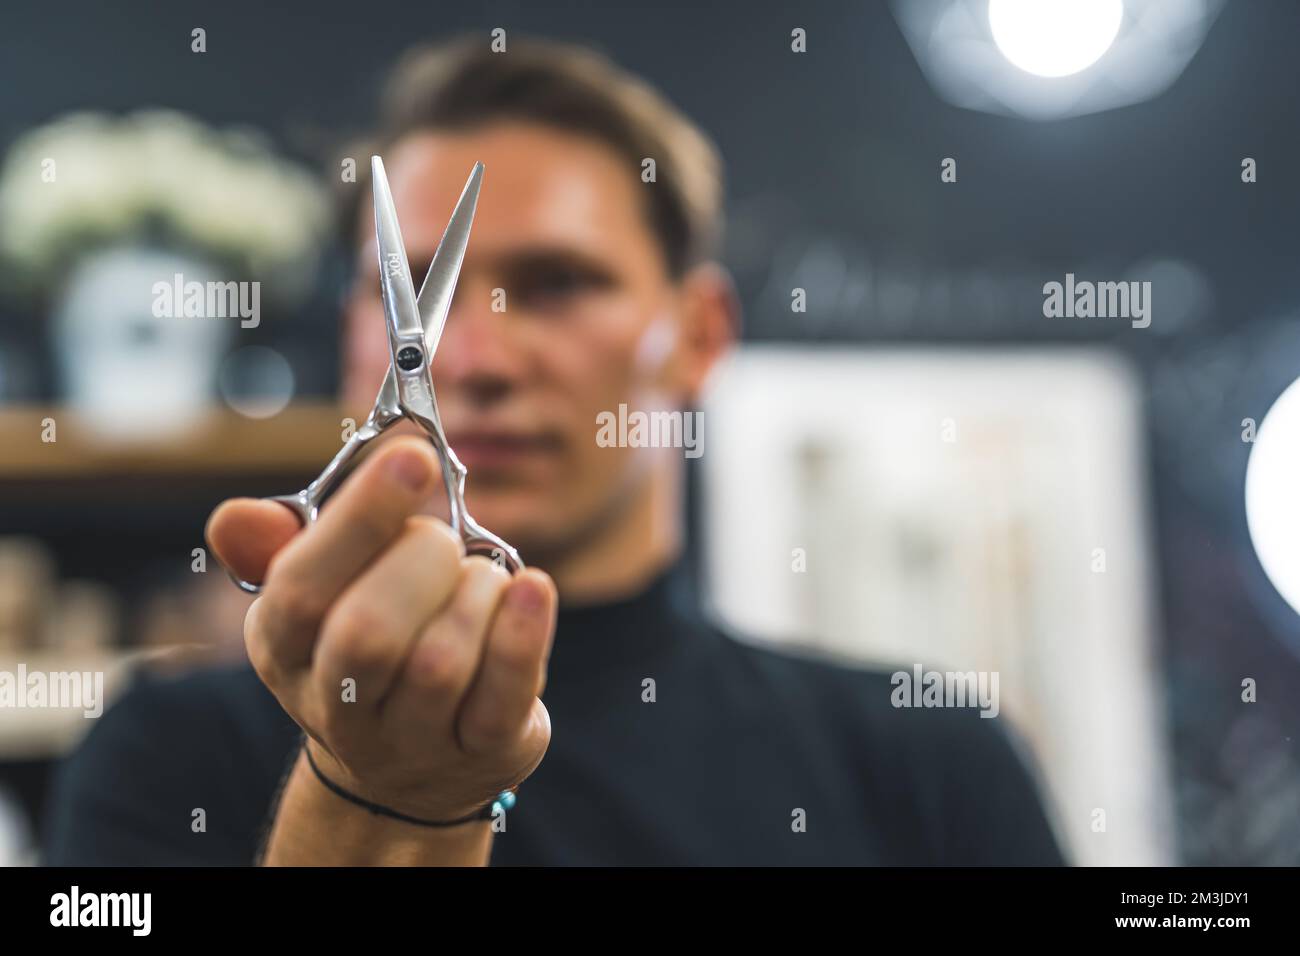 Blurred hairdresser man holding scissors in front of his face. High quality photo Stock Photo